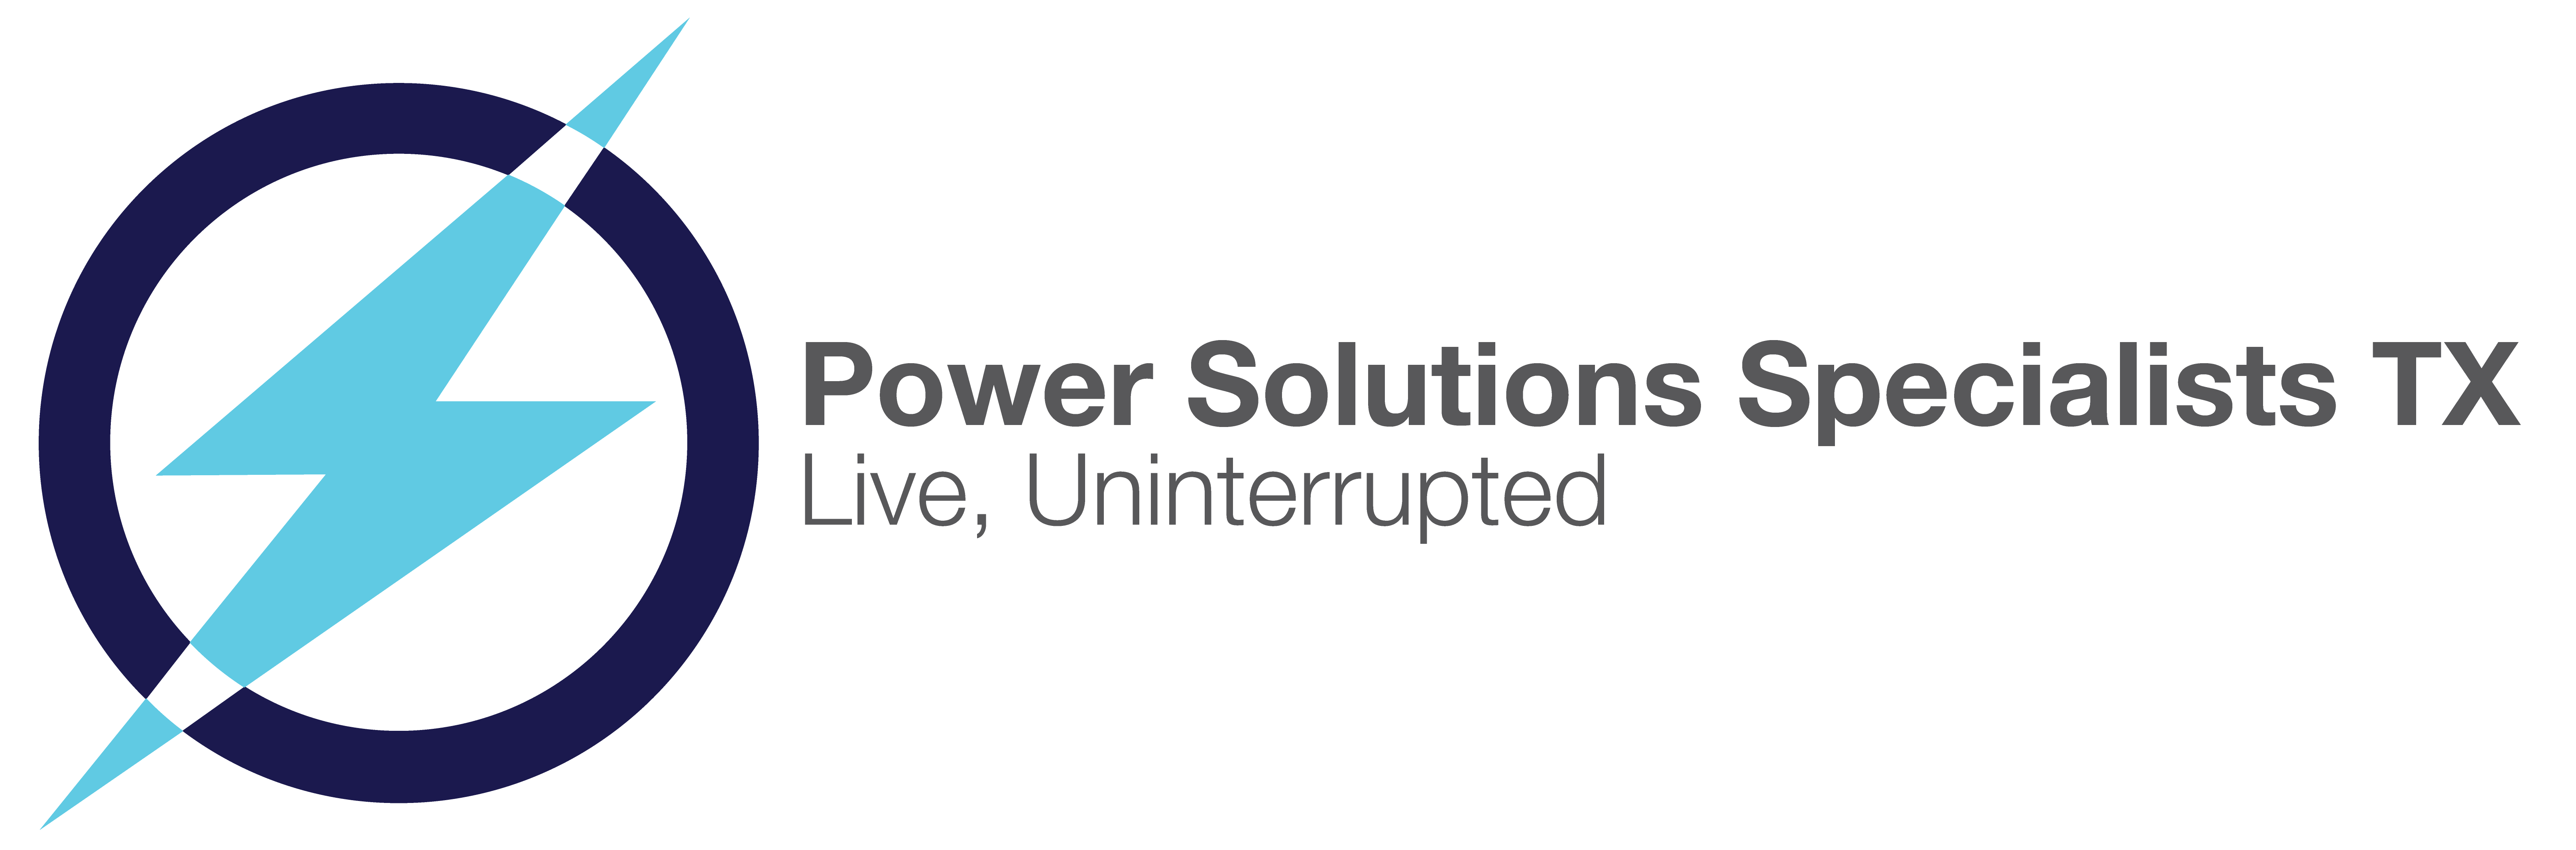 Power Solution Specialists TX